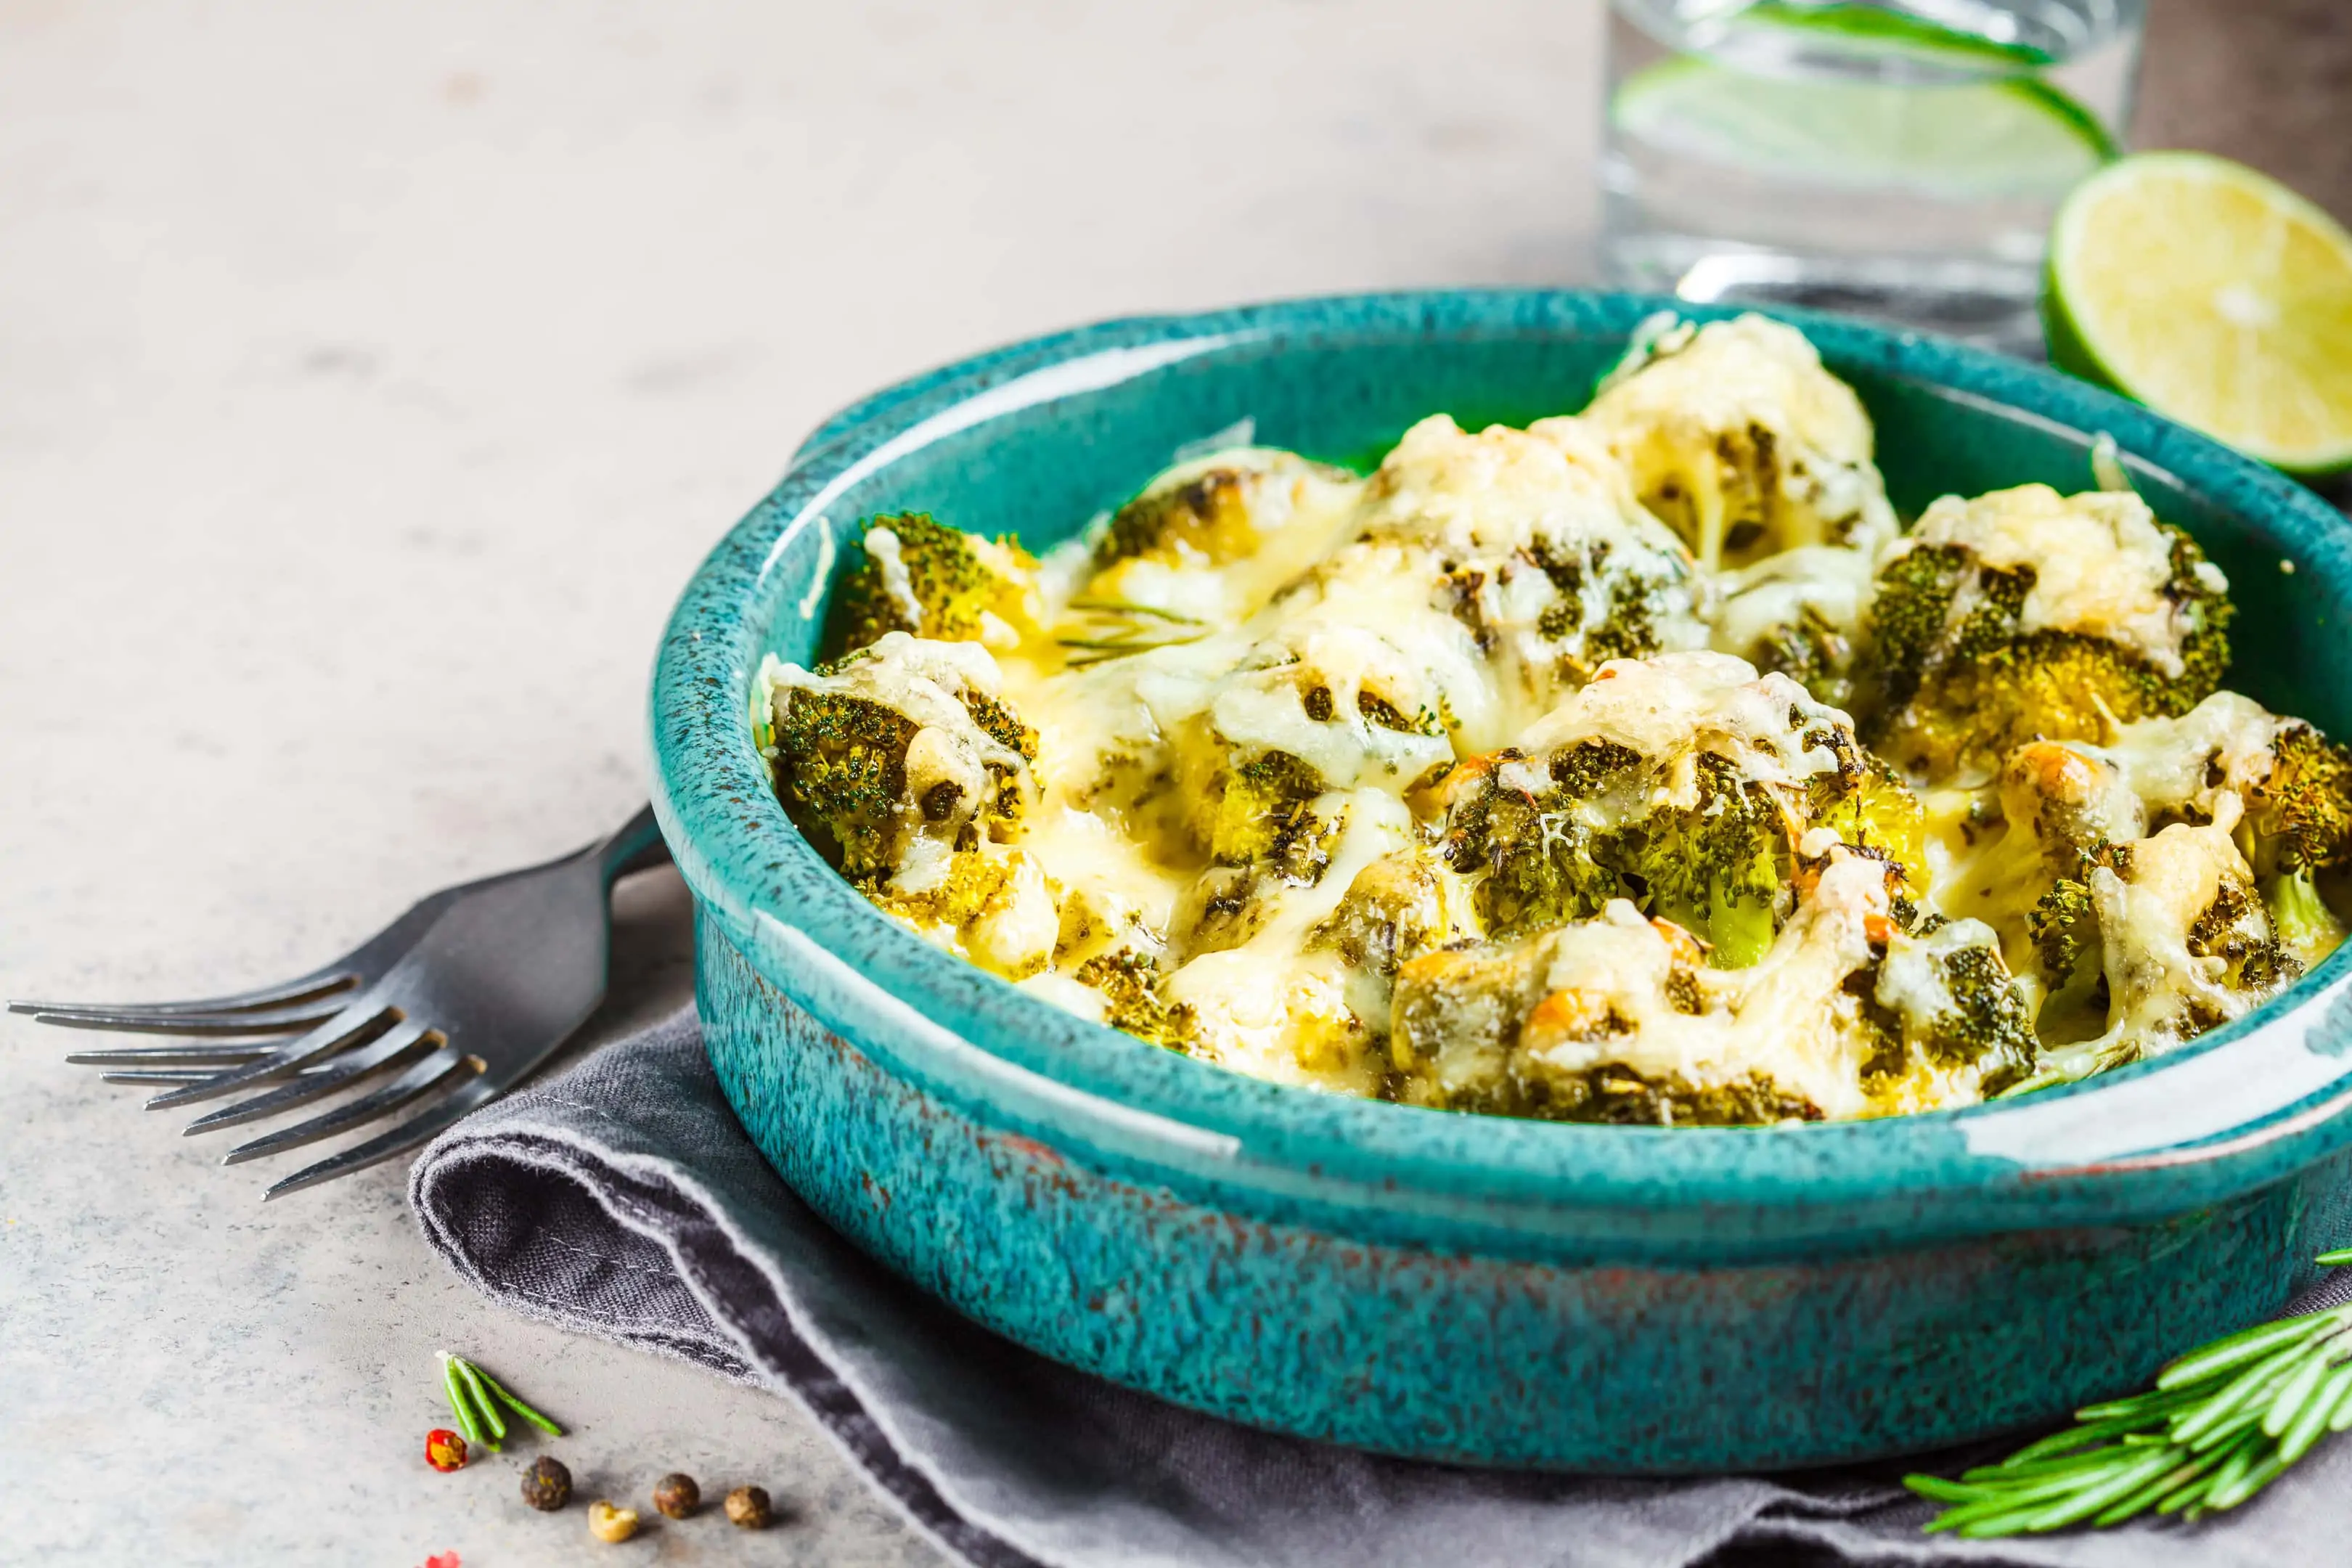 Baked Cheddar's broccoli cheese casserole